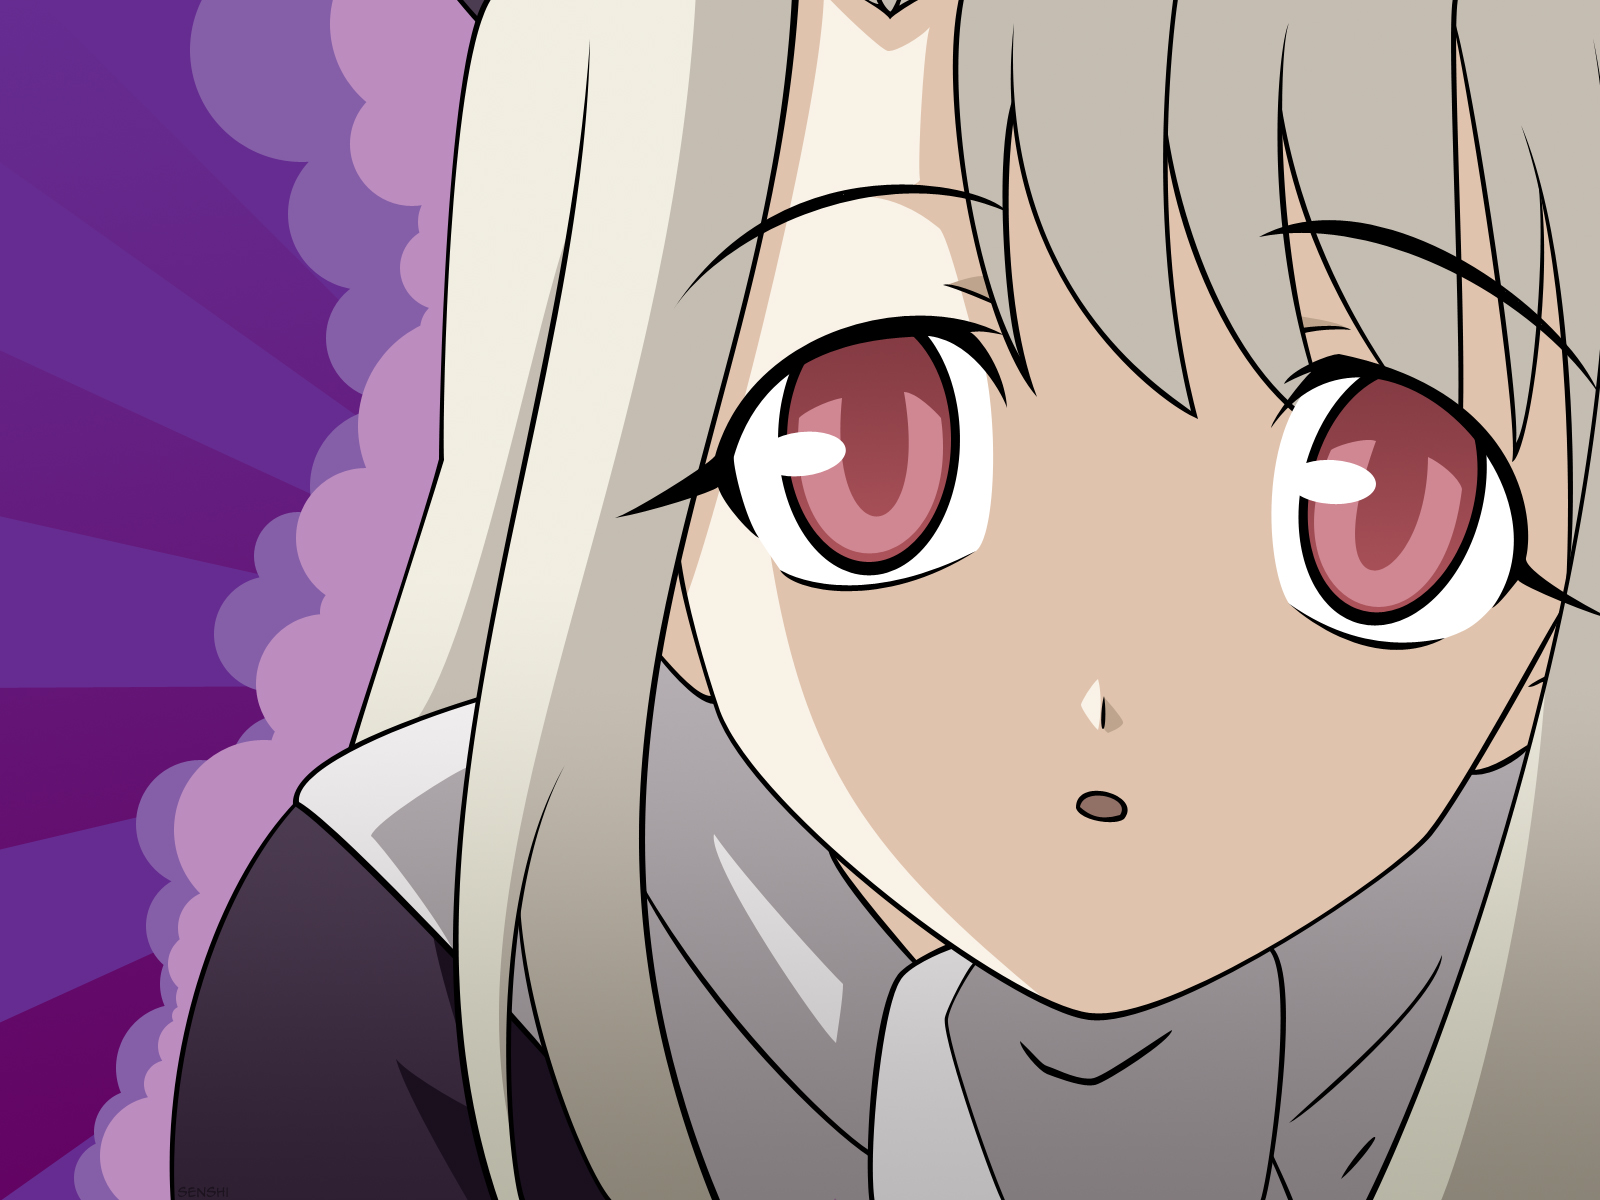 Illyasviel Von Einzbern - a character from the Anime Fate/stay night, graces this vibrant desktop wallpaper